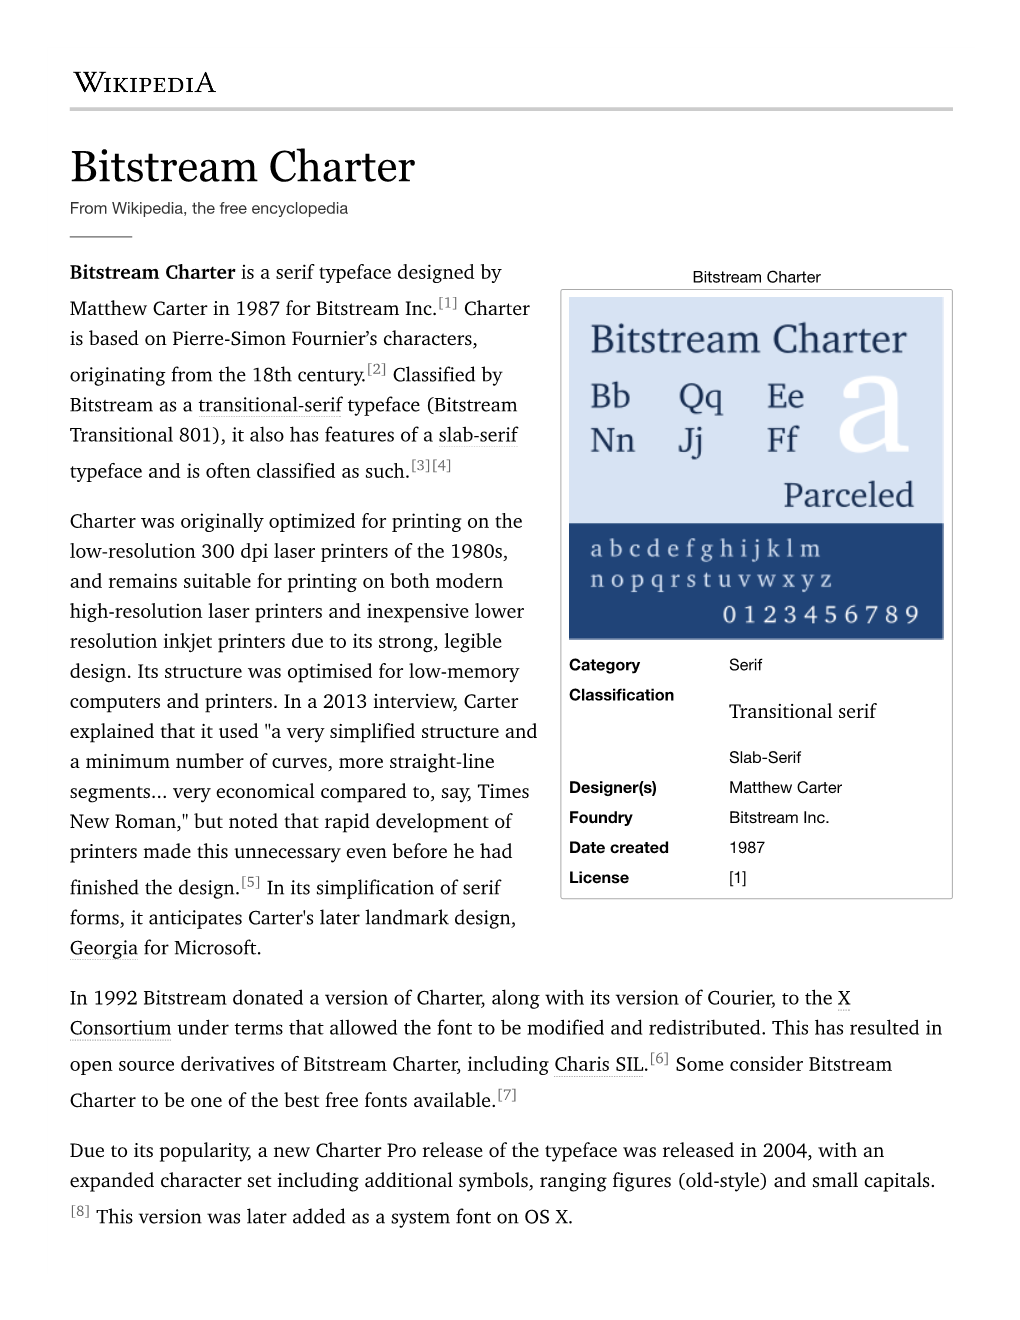 Bitstream Charter from Wikipedia, the Free Encyclopedia